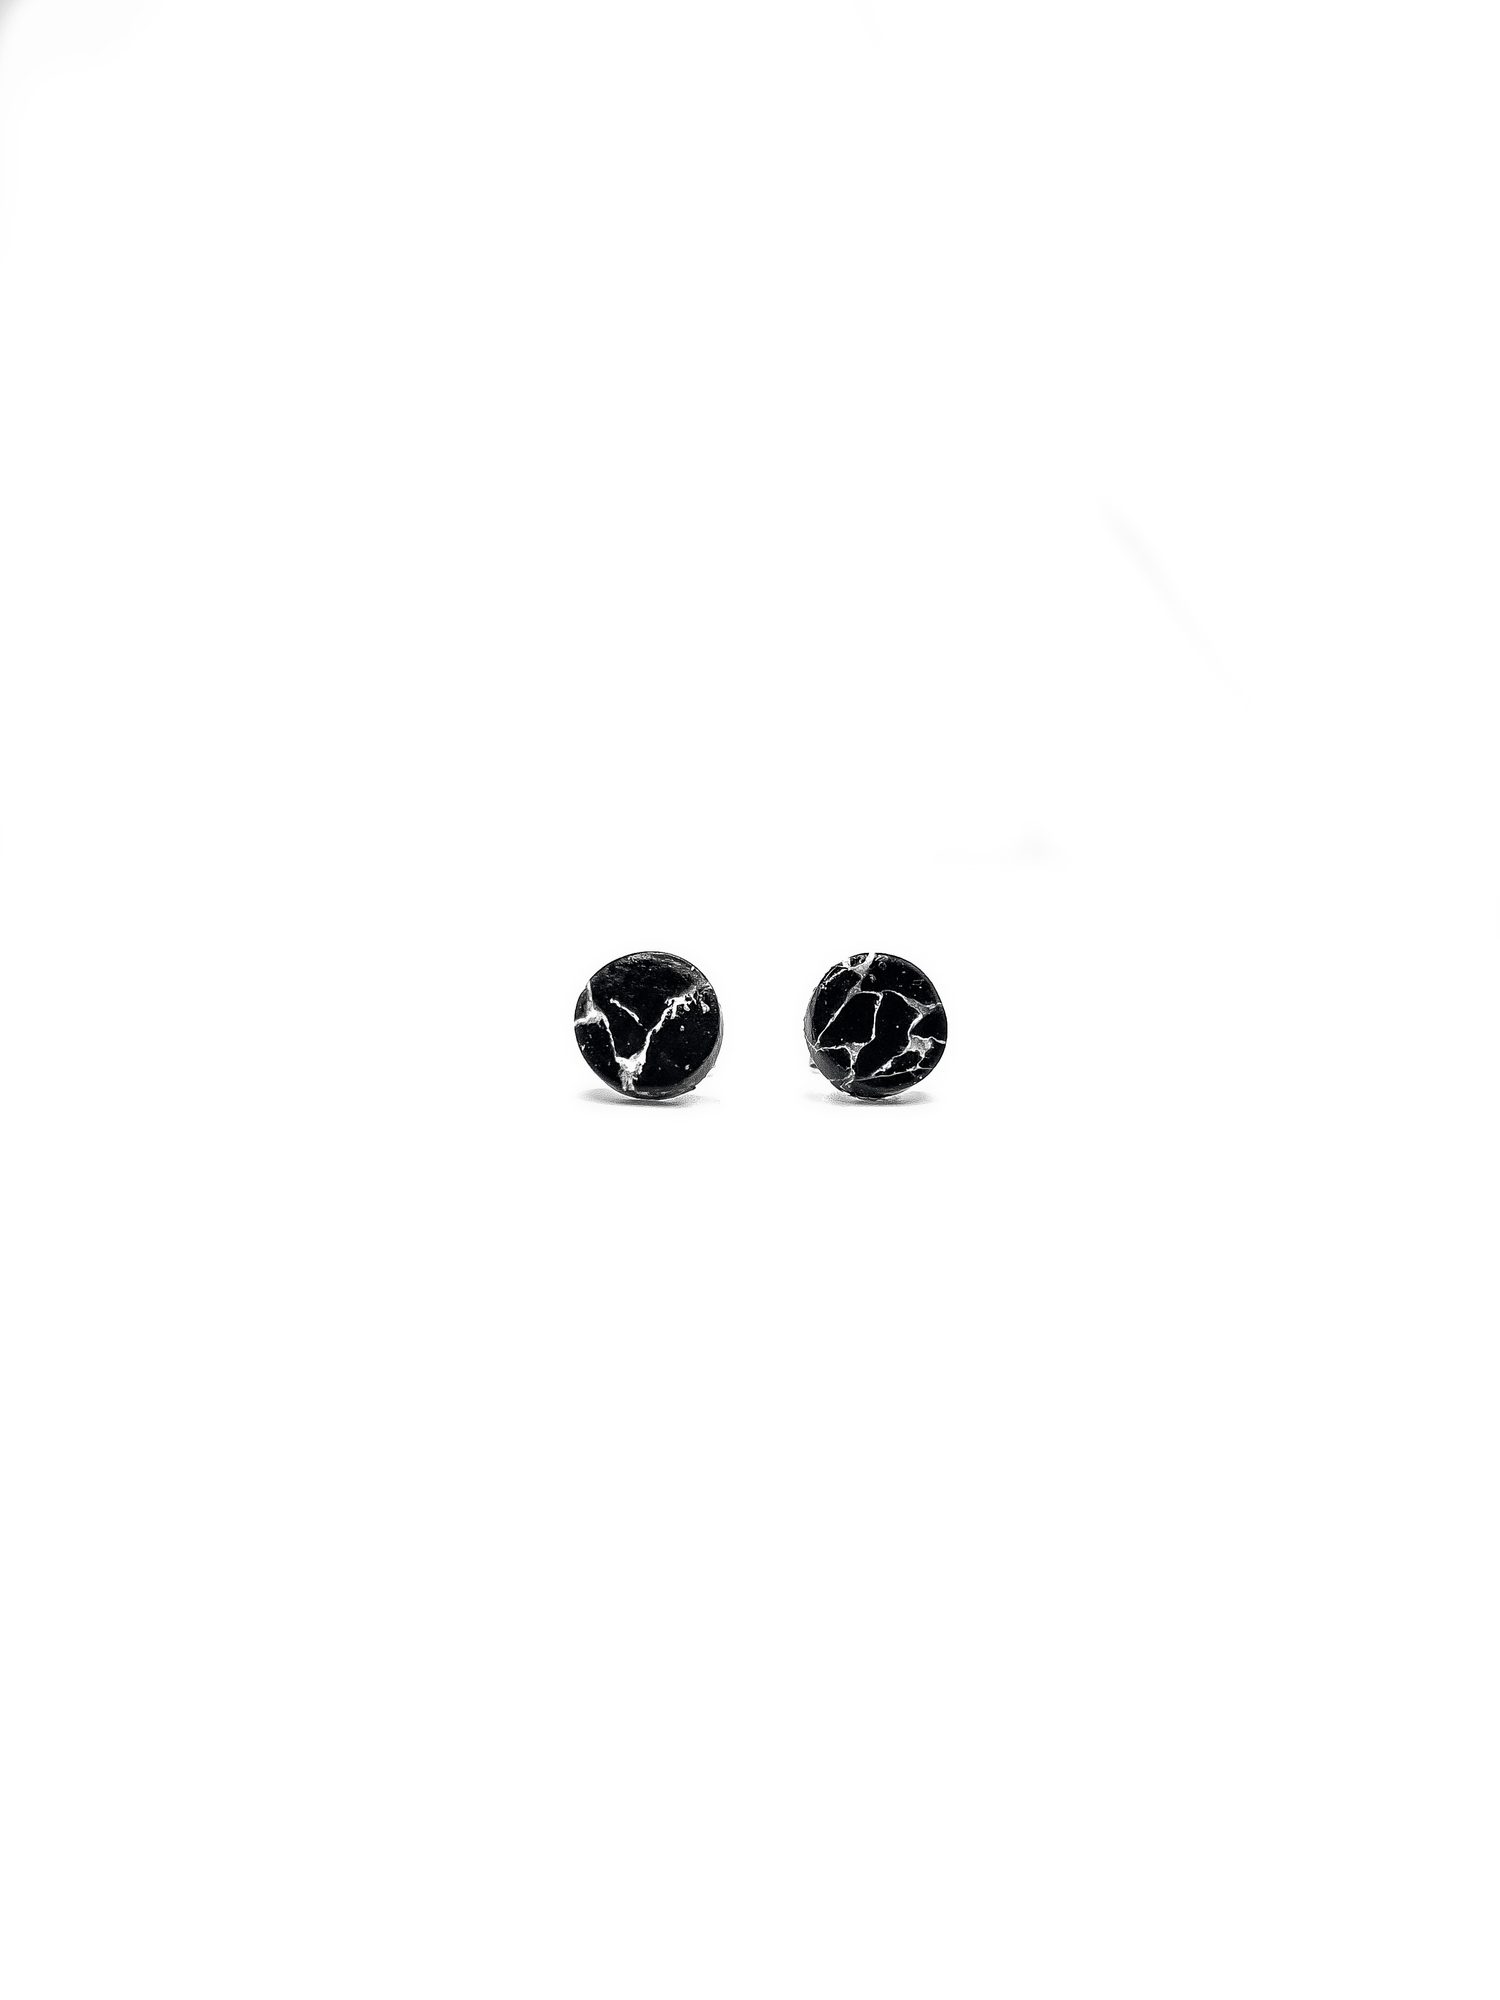 Black polymer clay stud earrings in size small